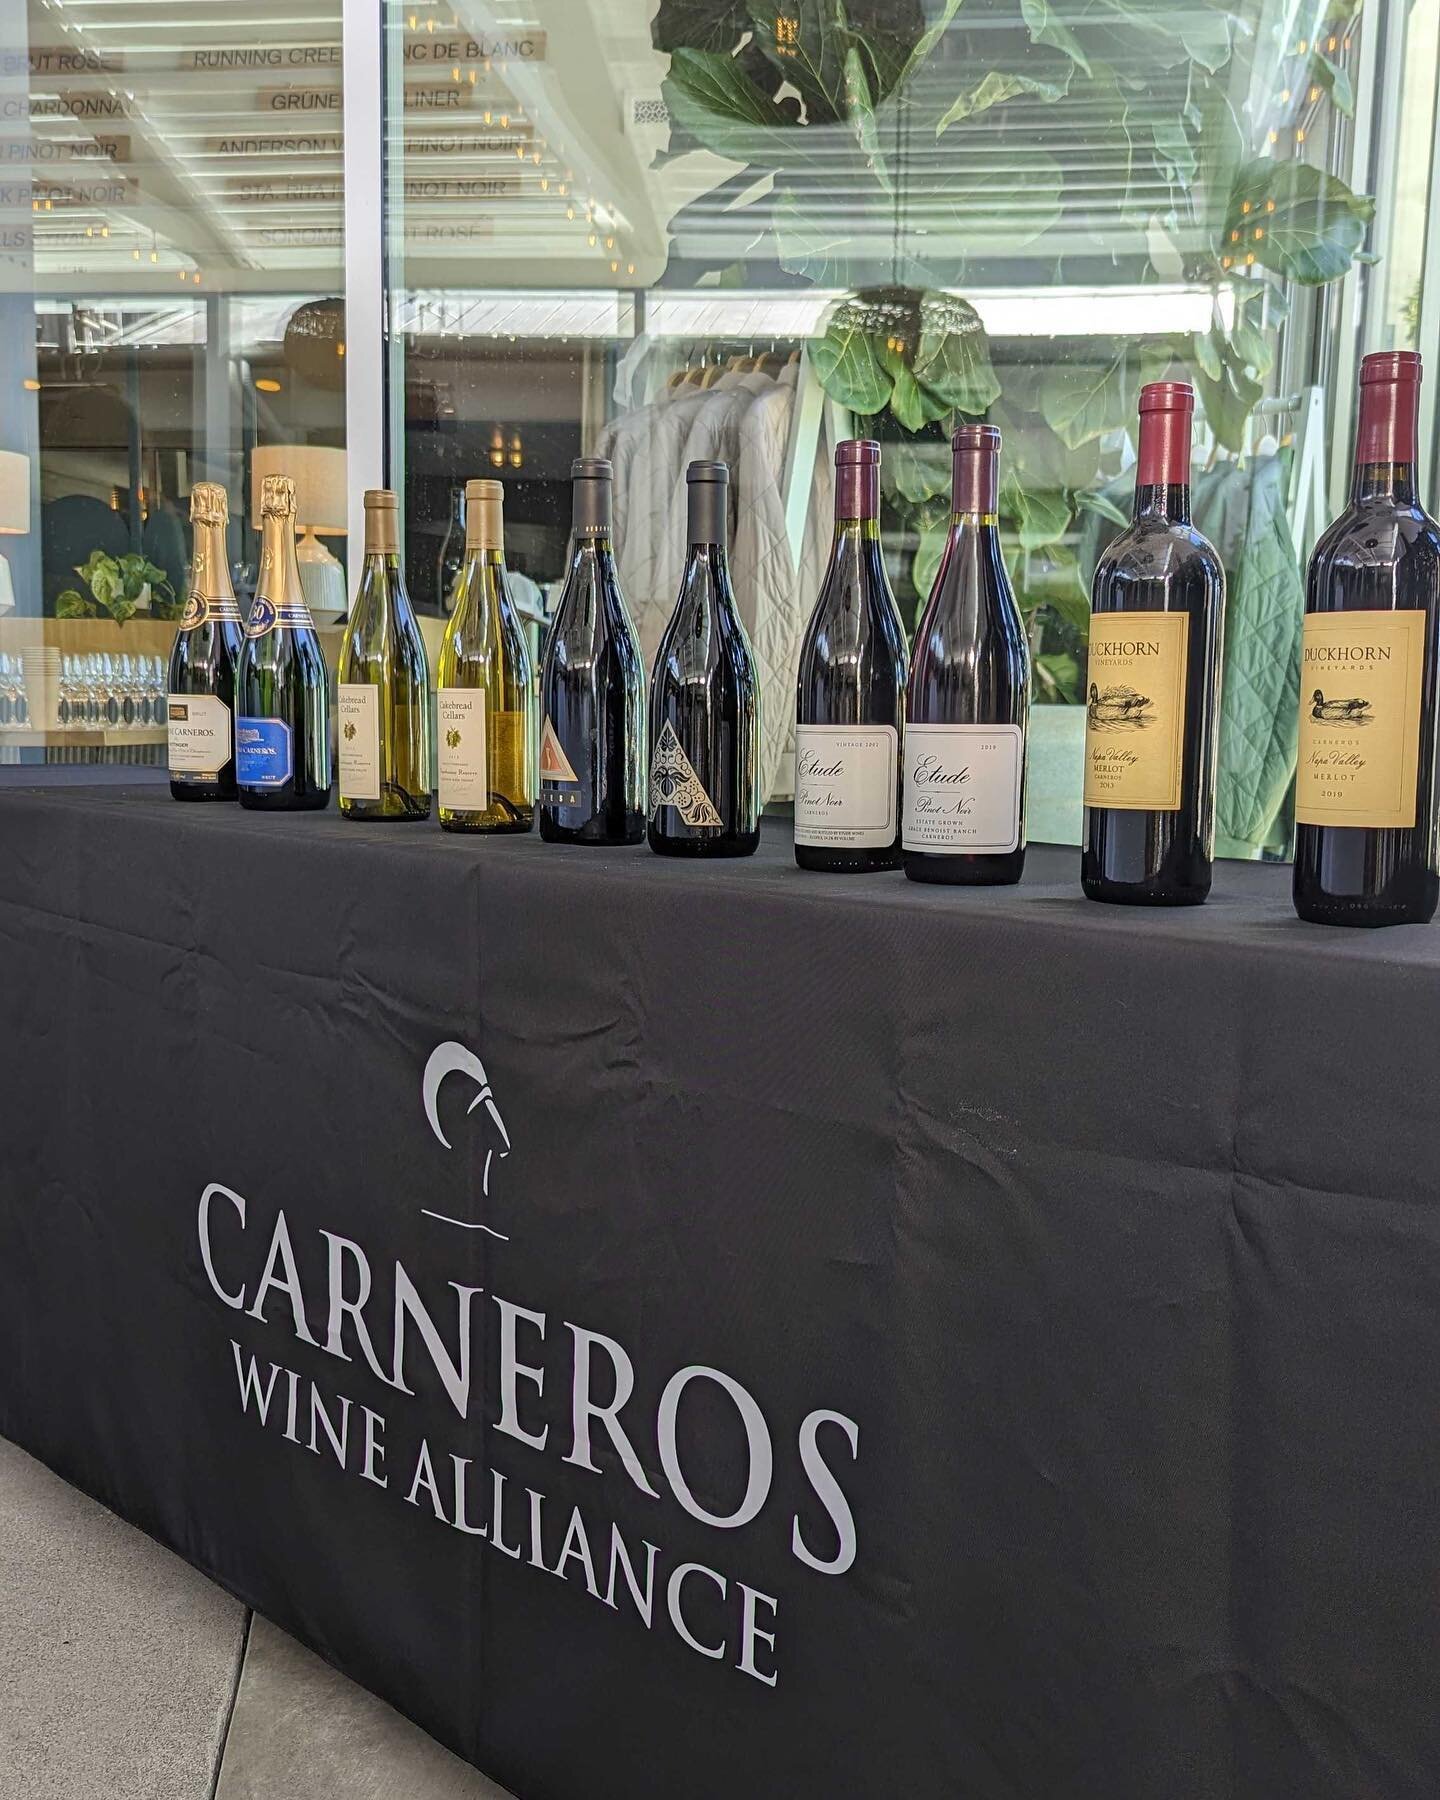 Celebrating 40 years of @carneroswine! 🥂 Last week we marked the occasion with a &ldquo;Retrospective of the Historical Vineyards&rdquo; in this premier, cool-climate AVA, led by @erinkirsch, managing editor of @winebusinessmonthly.

Found at the cr